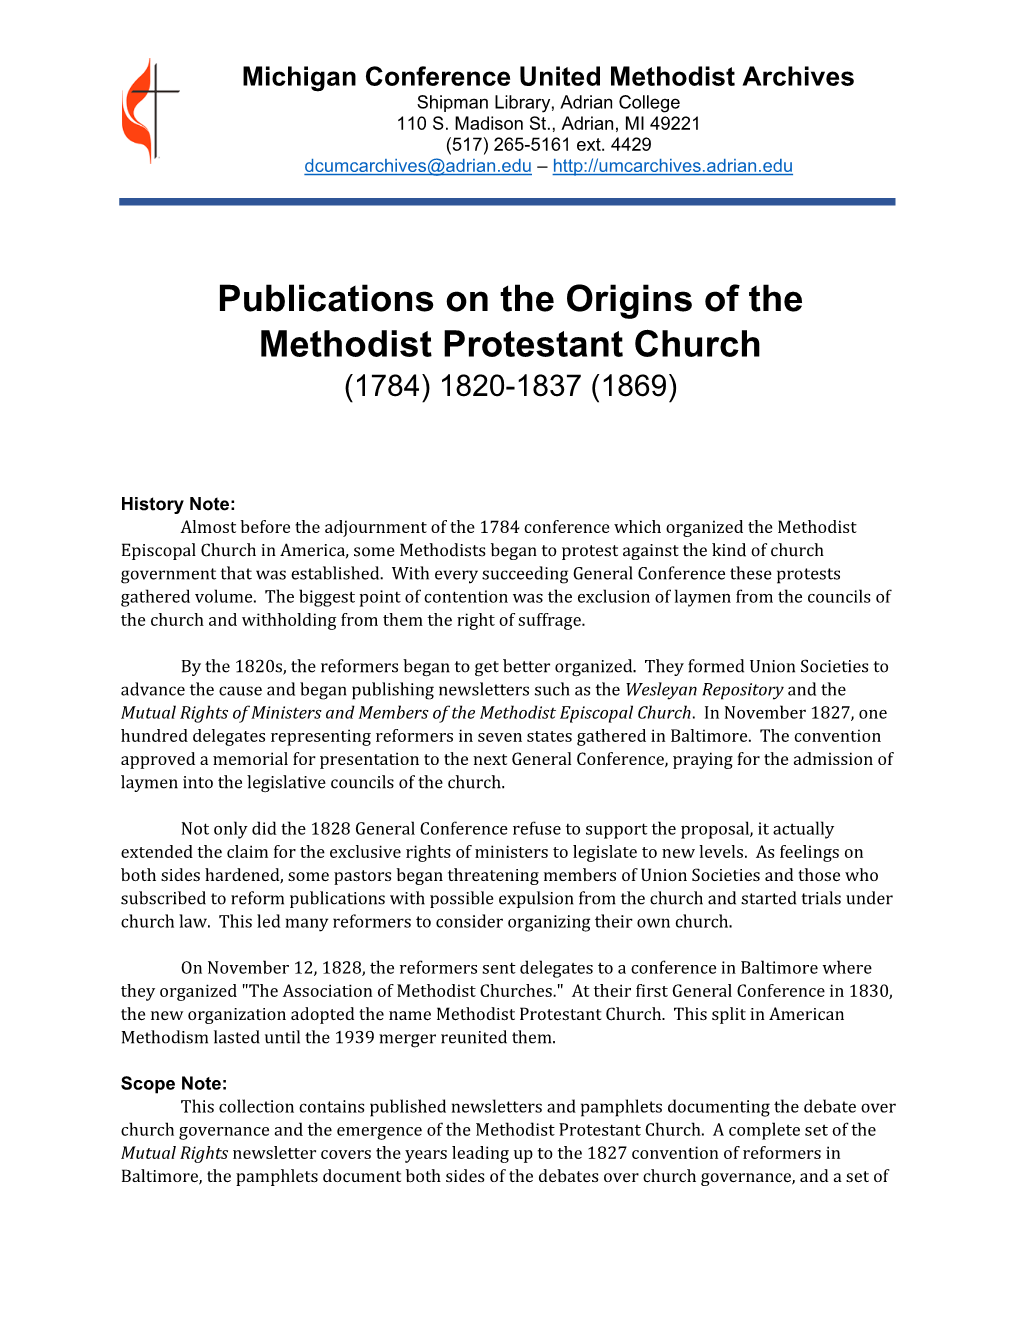 Publications on the Origins of the Methodist Protestant Church (1784) 1820-1837 (1869)